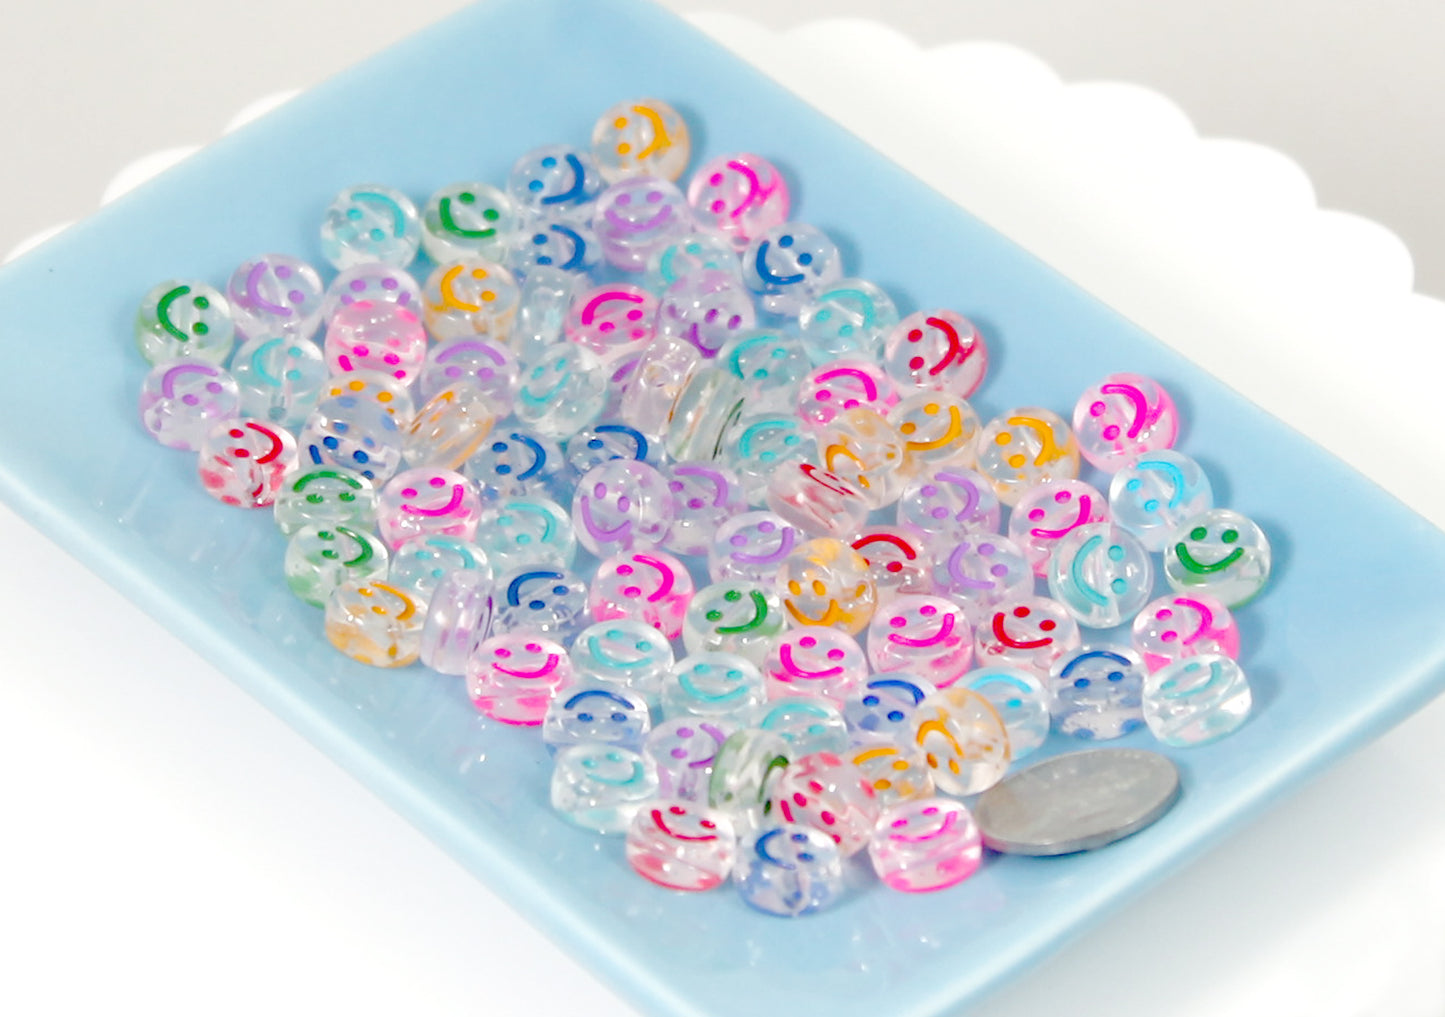 Happy Face Beads - 10mm Glitter Translucent Smile Shape Acrylic or Resin Beads - 100 pc set